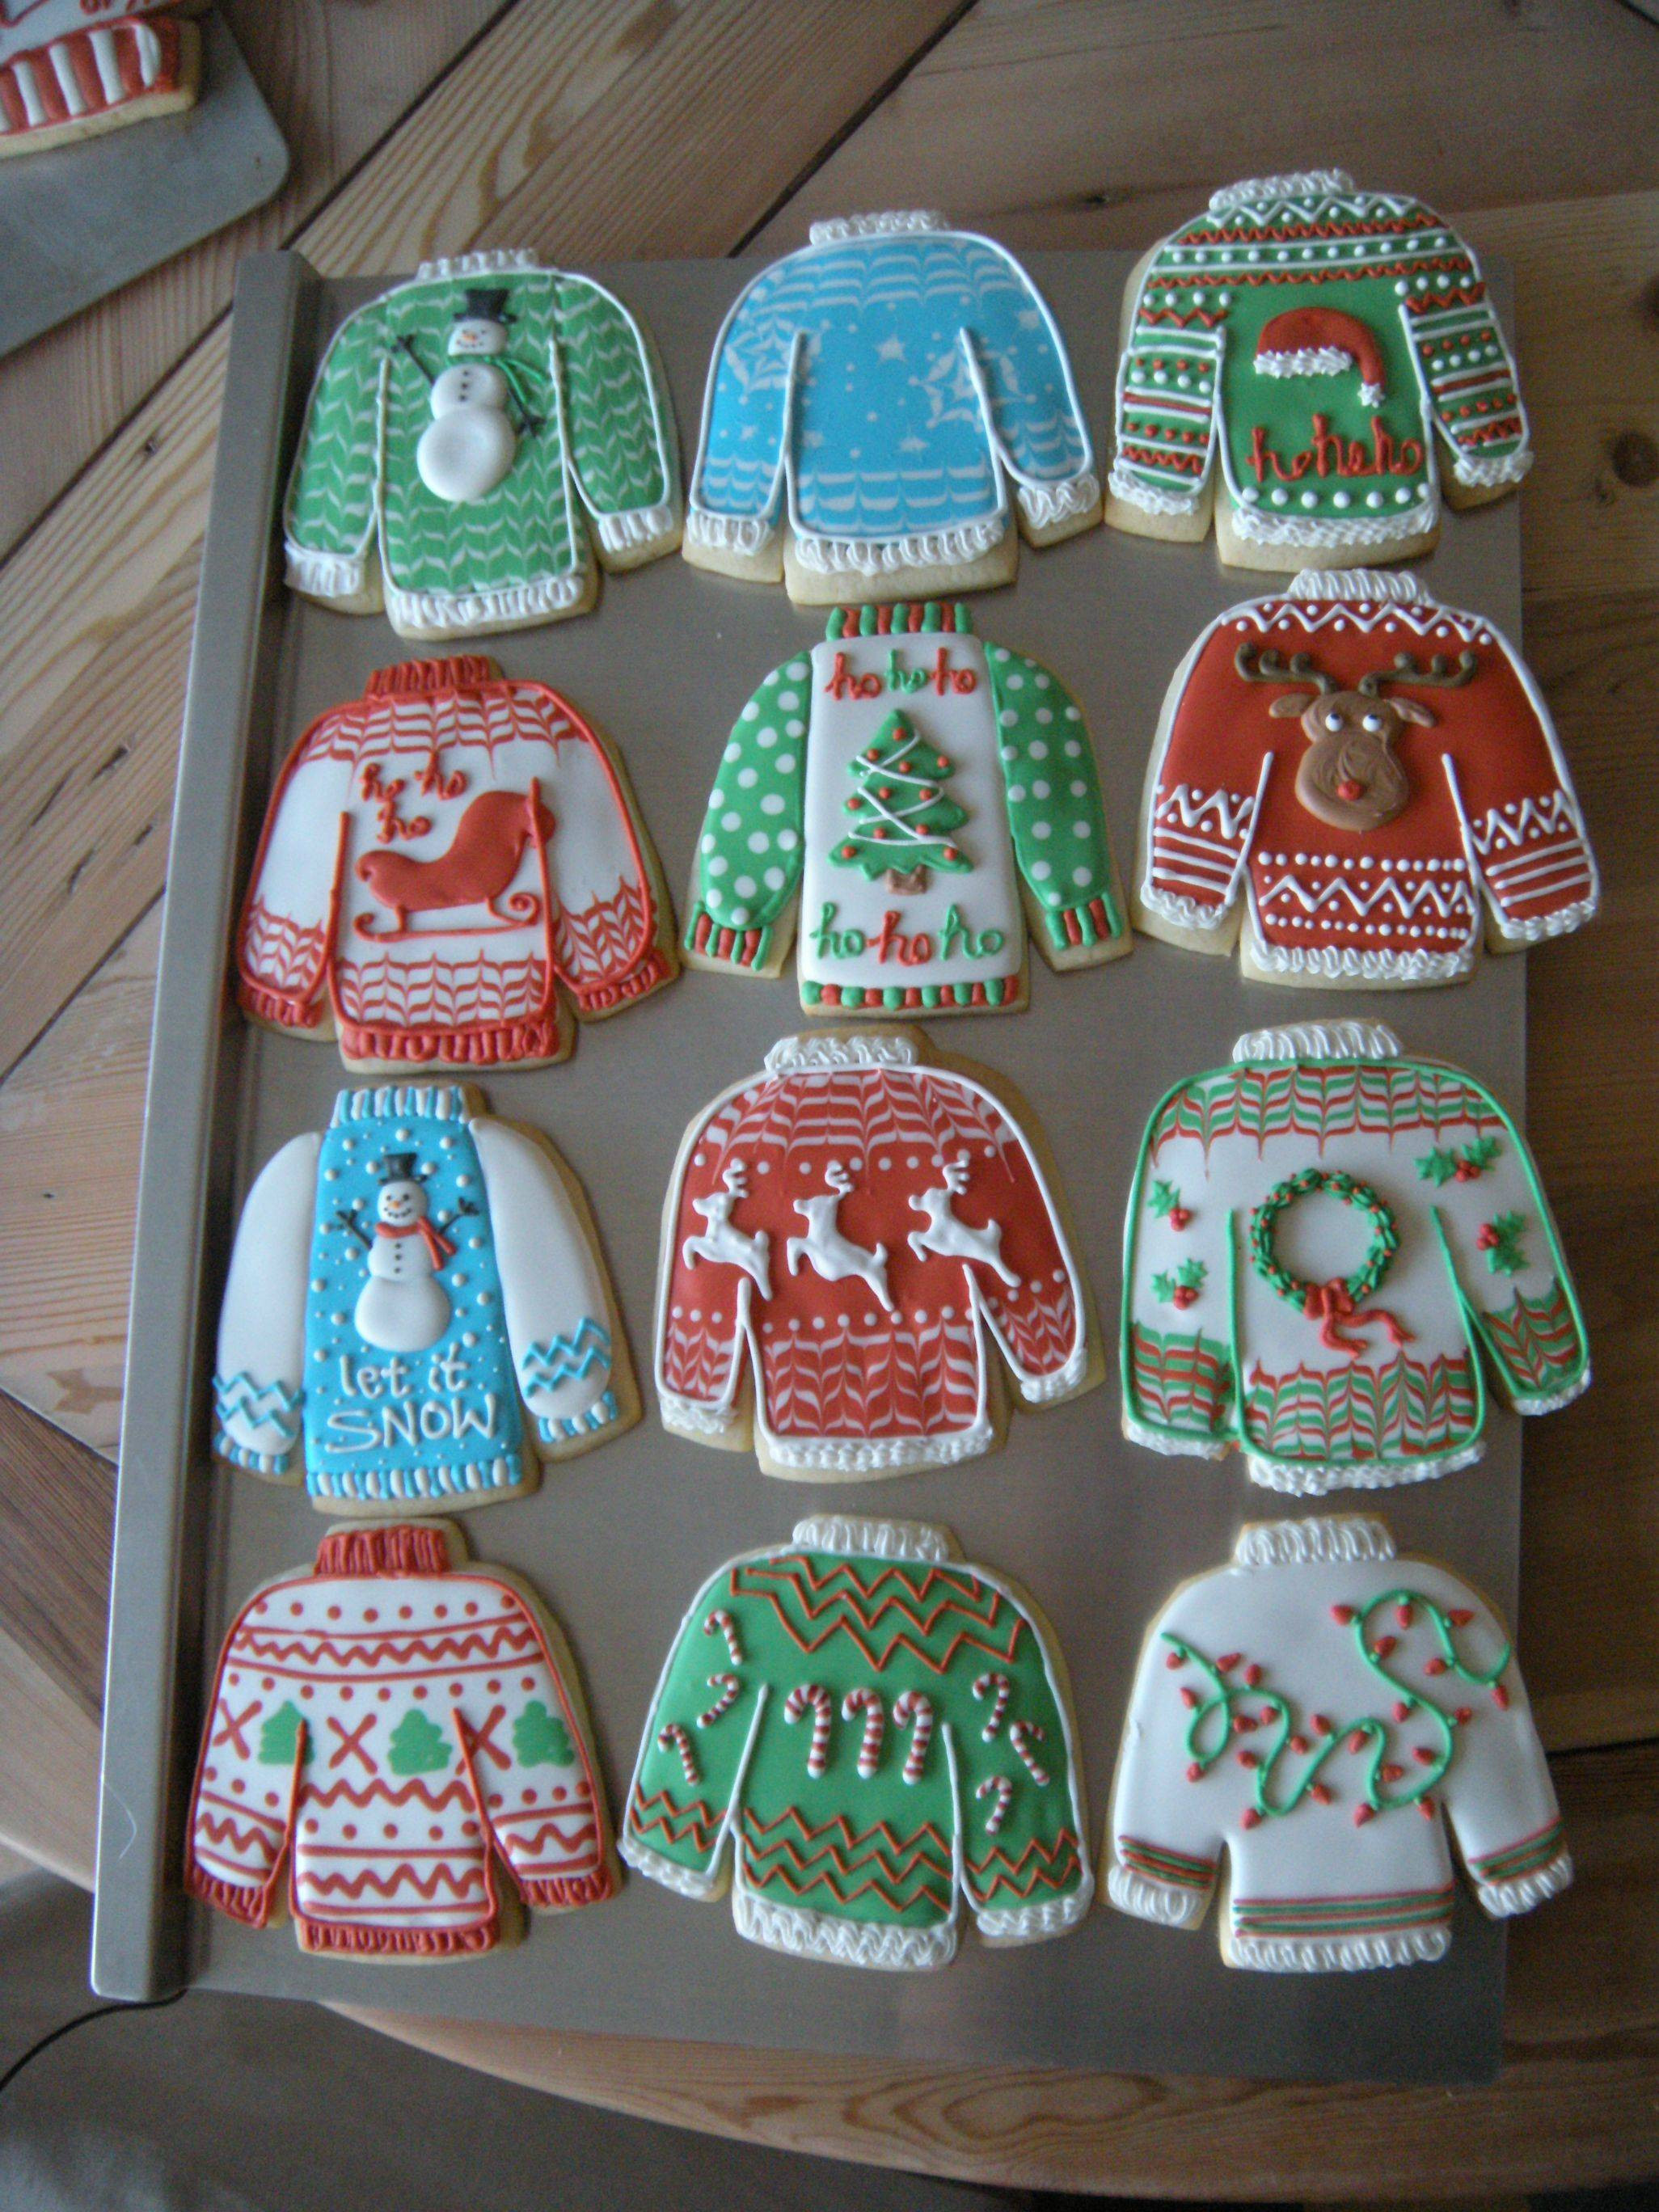 Ugly Christmas Cookies
 I decided to try some "ugly Christmas sweater" cookies